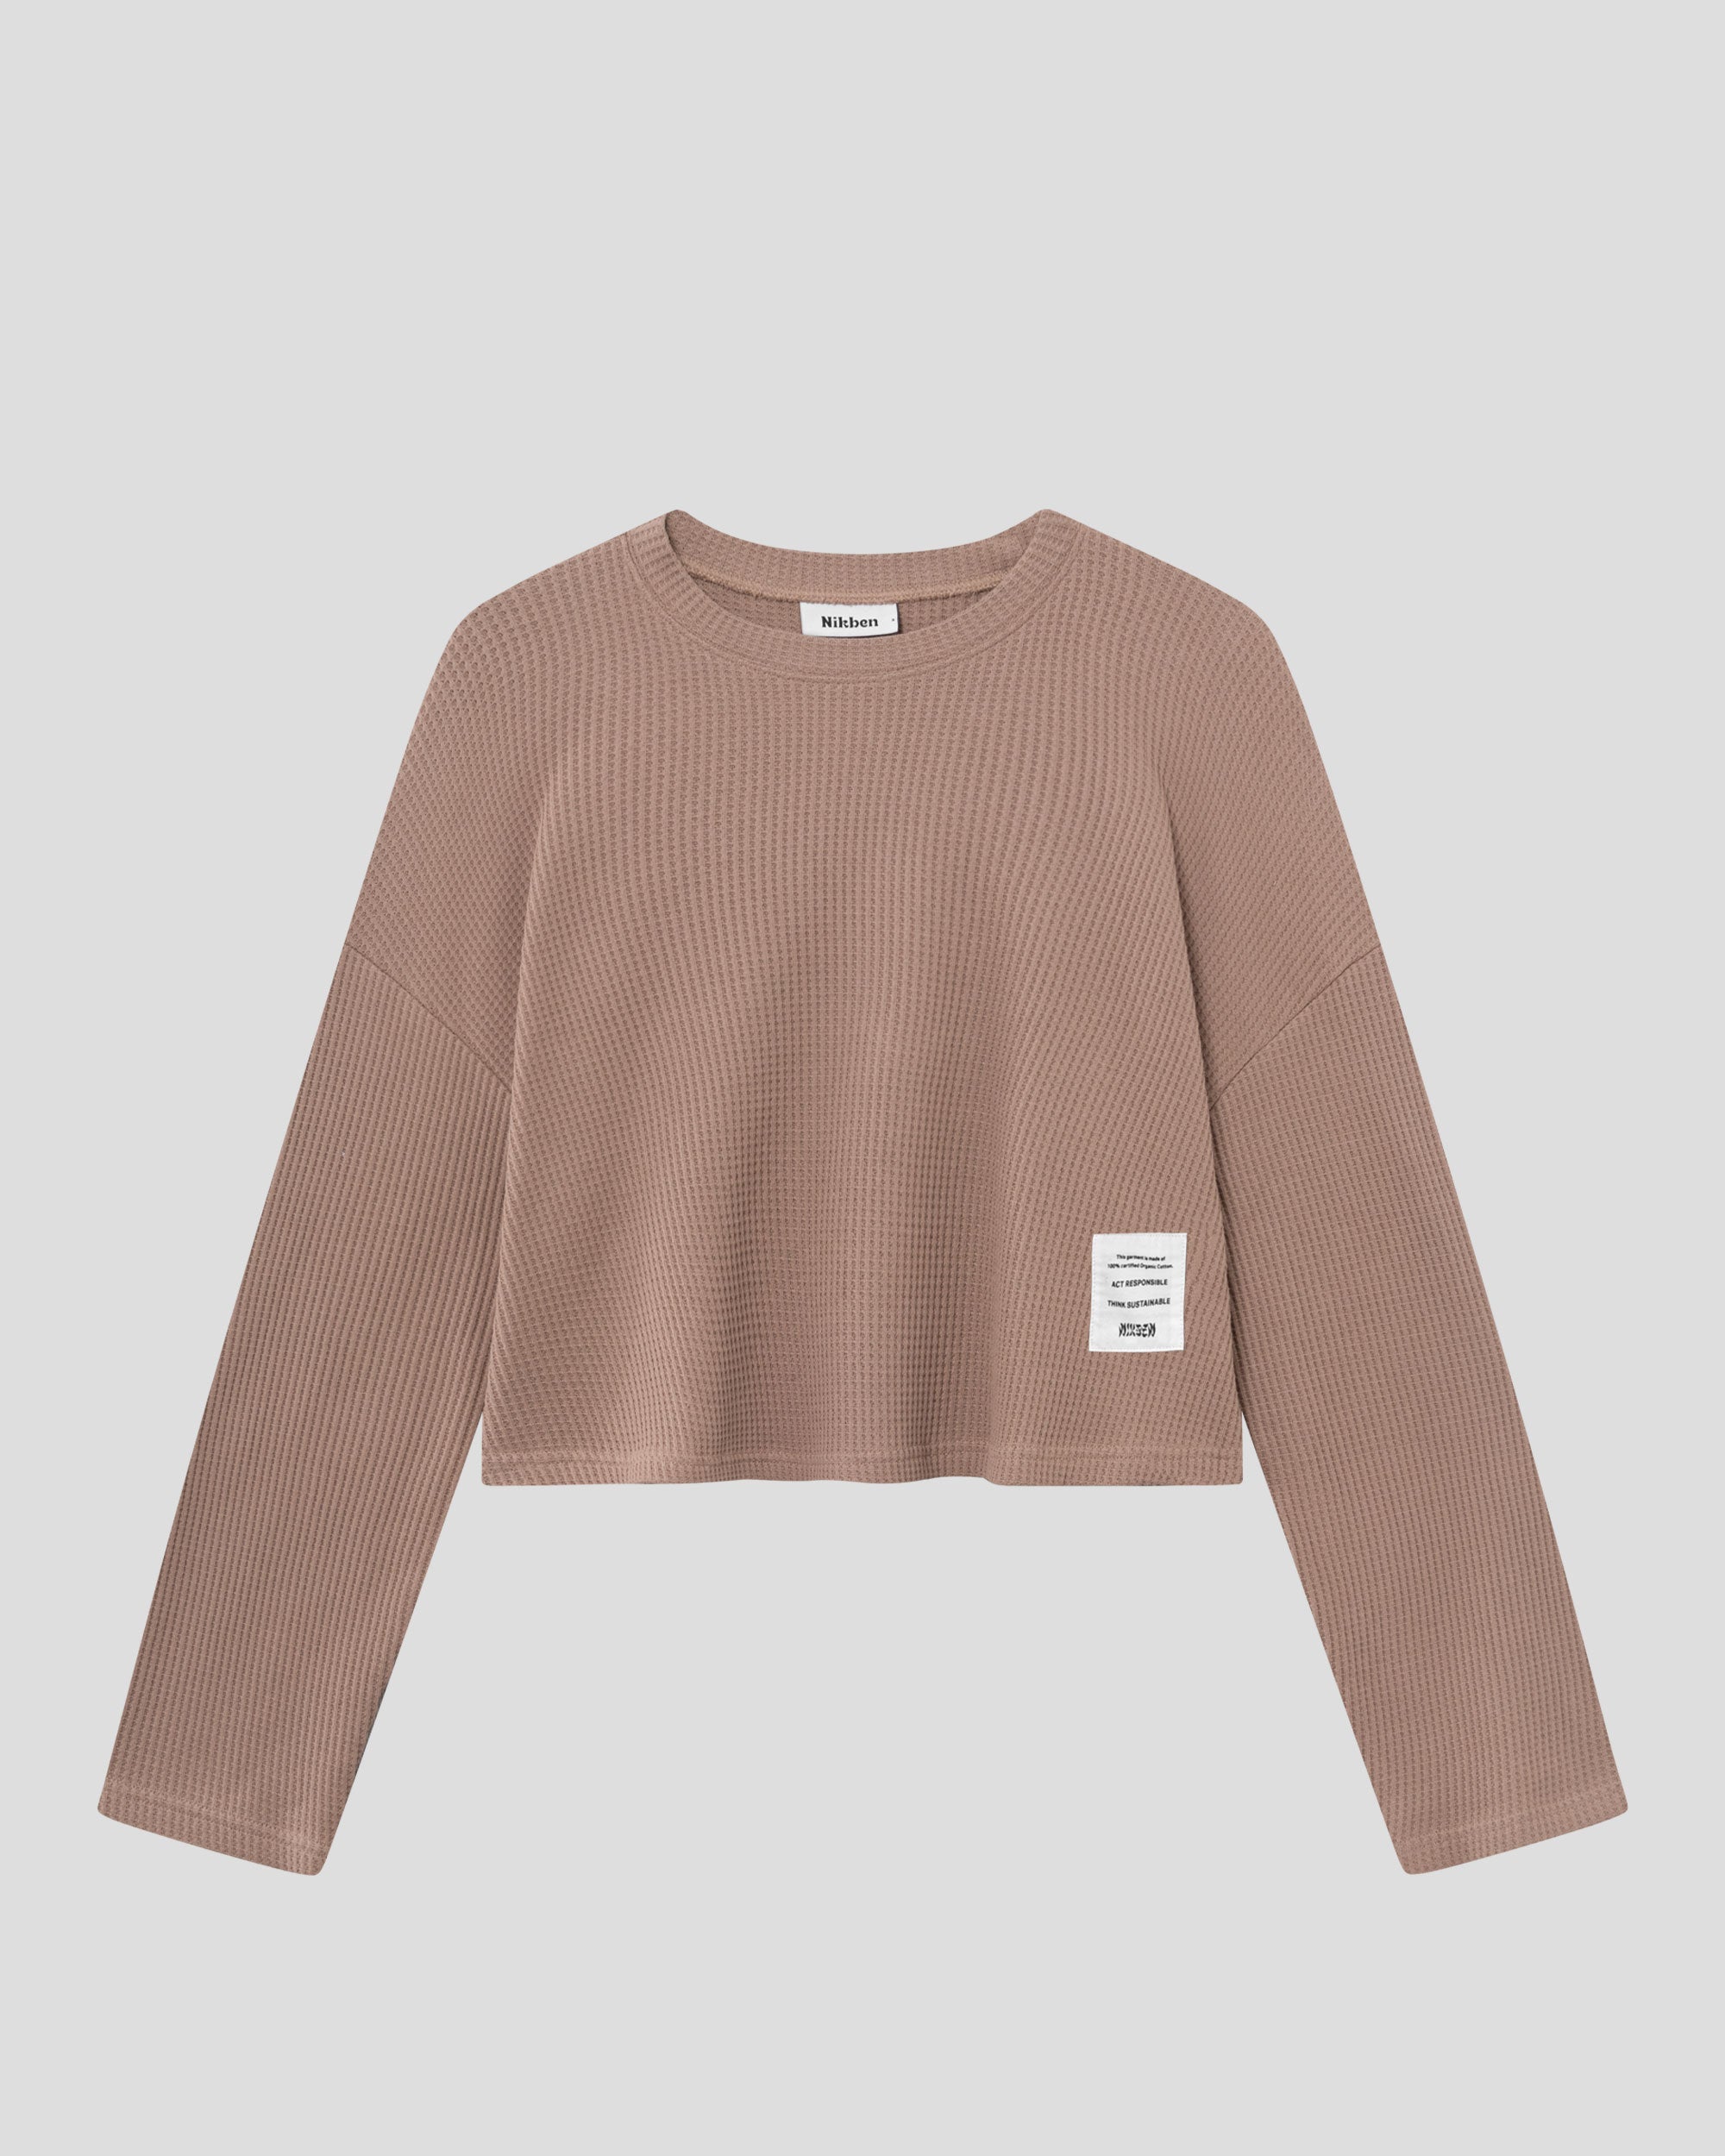 Brown waffle-patterned cropped sweatshirt with a stitched-on material label.